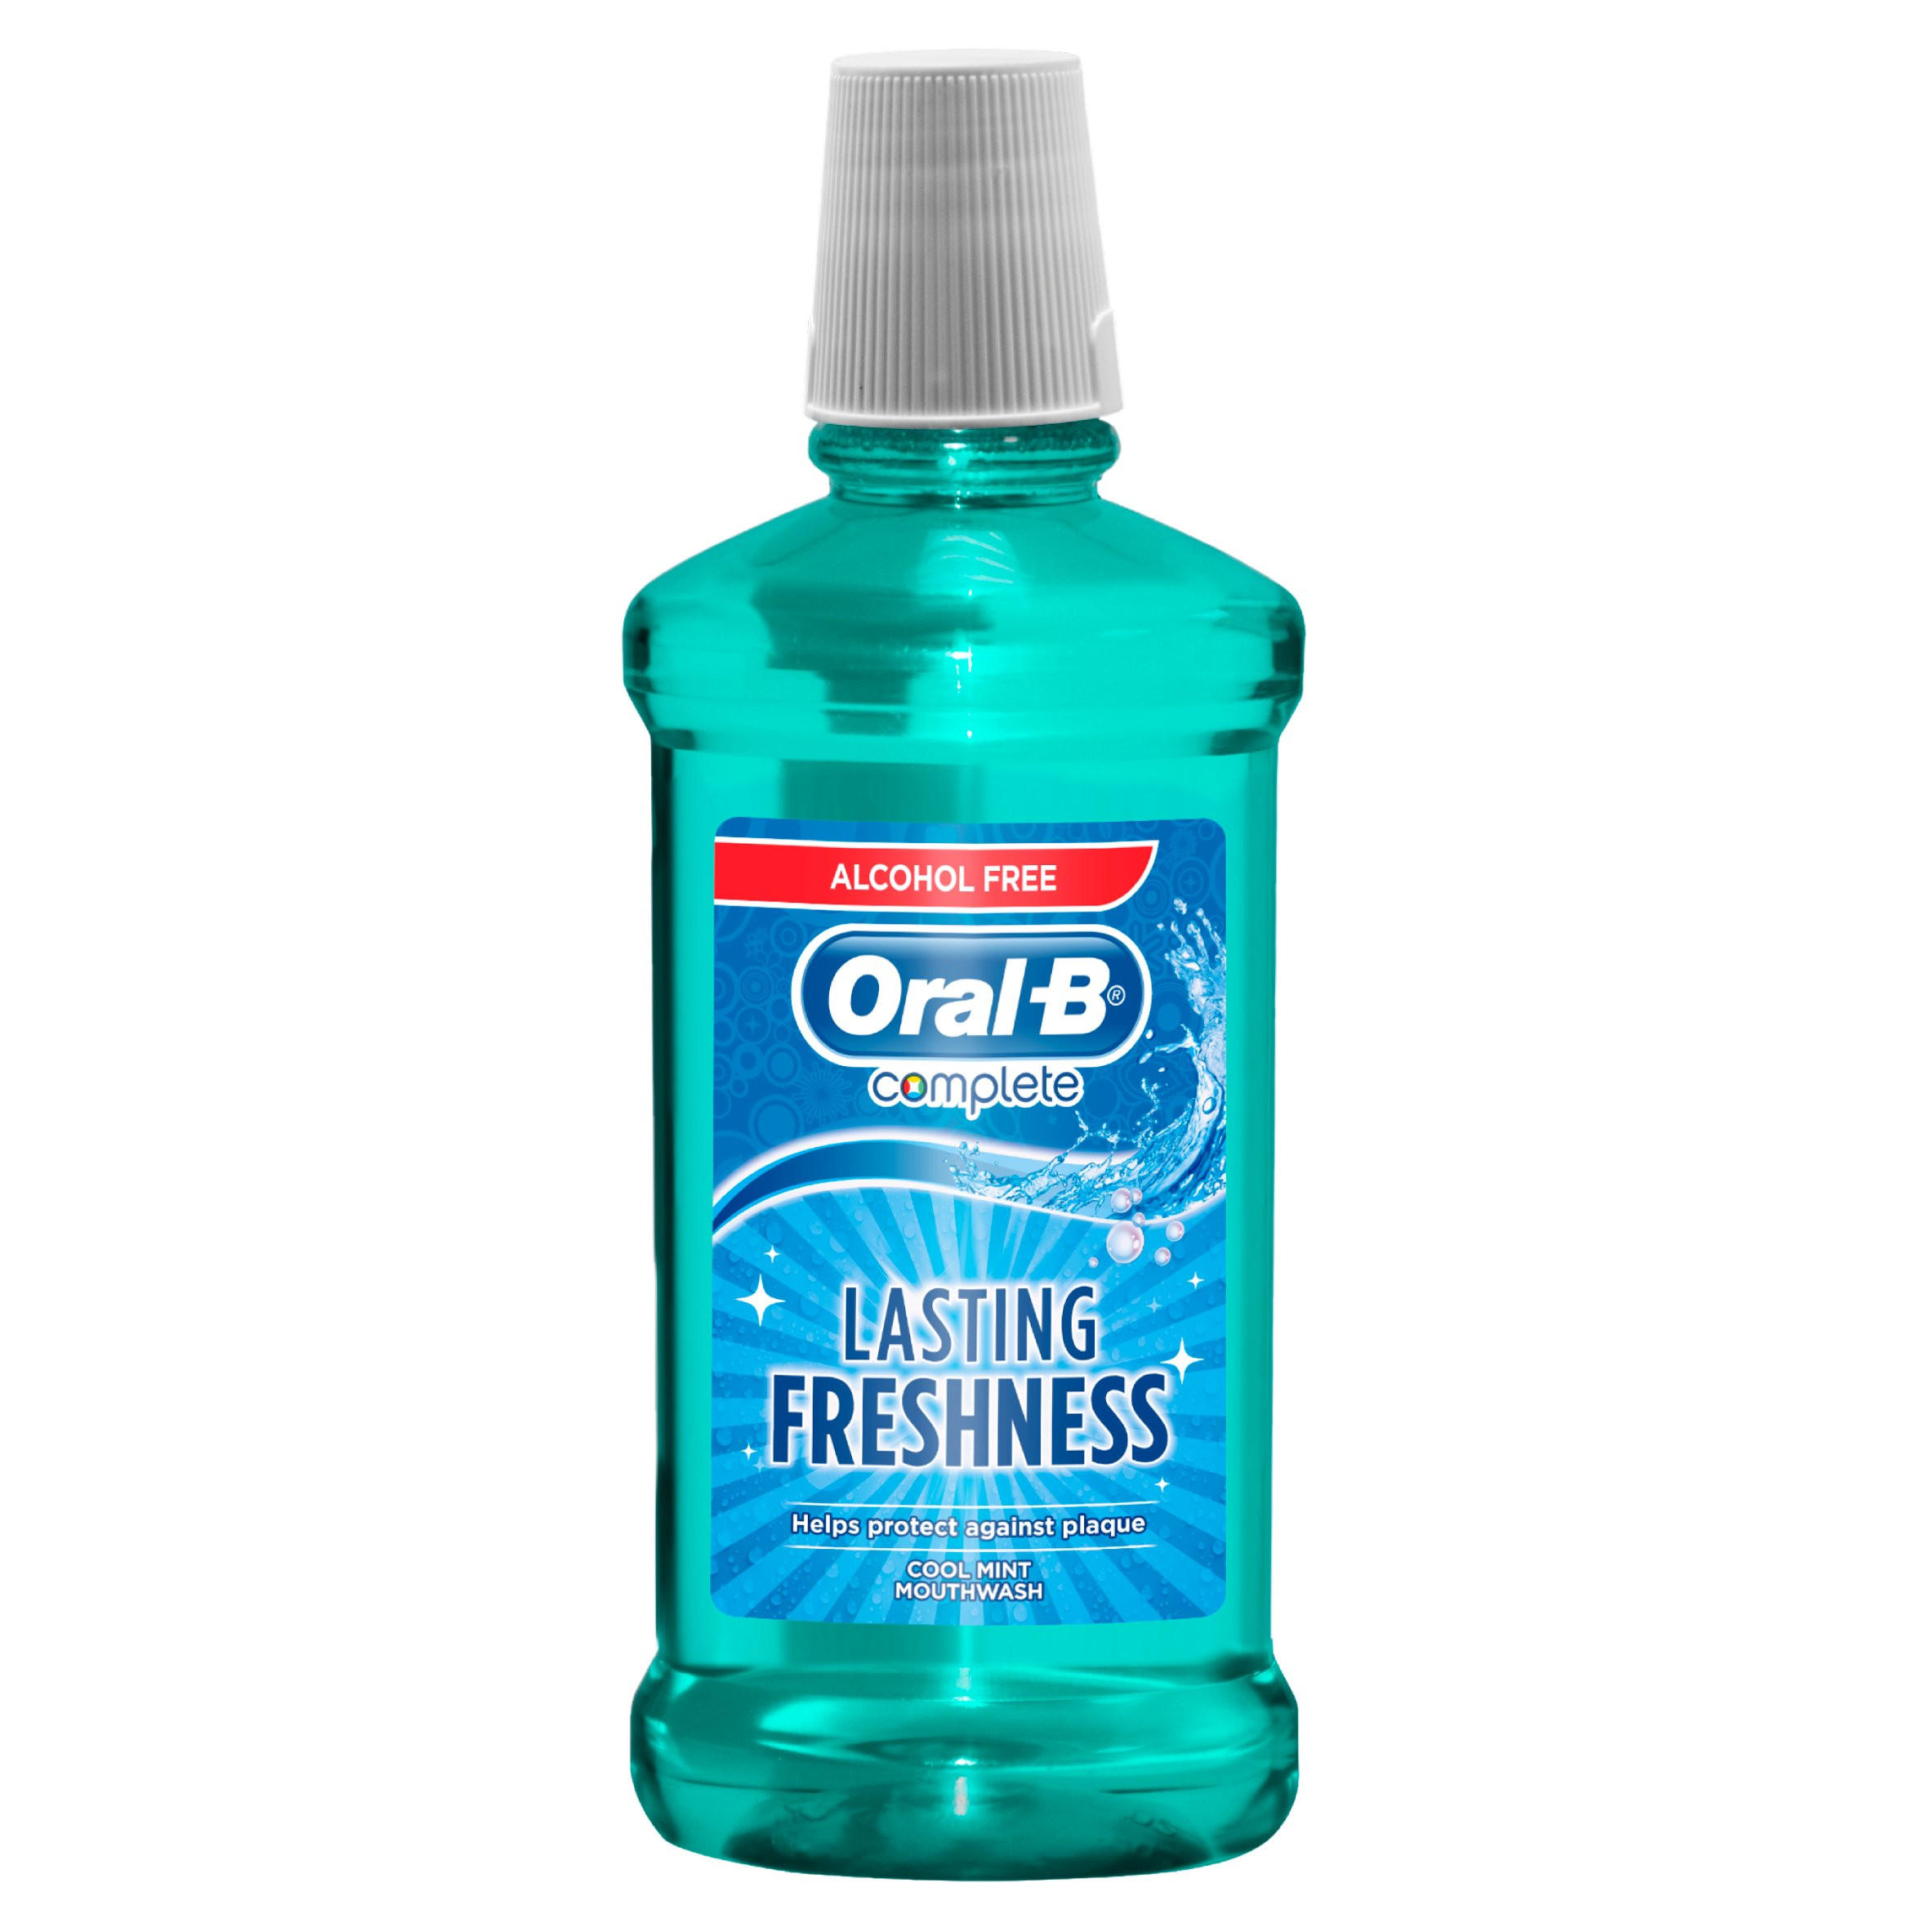 Oral B Toothpaste And Mouthwash Xtra Clean Toothbrush Wisdom They